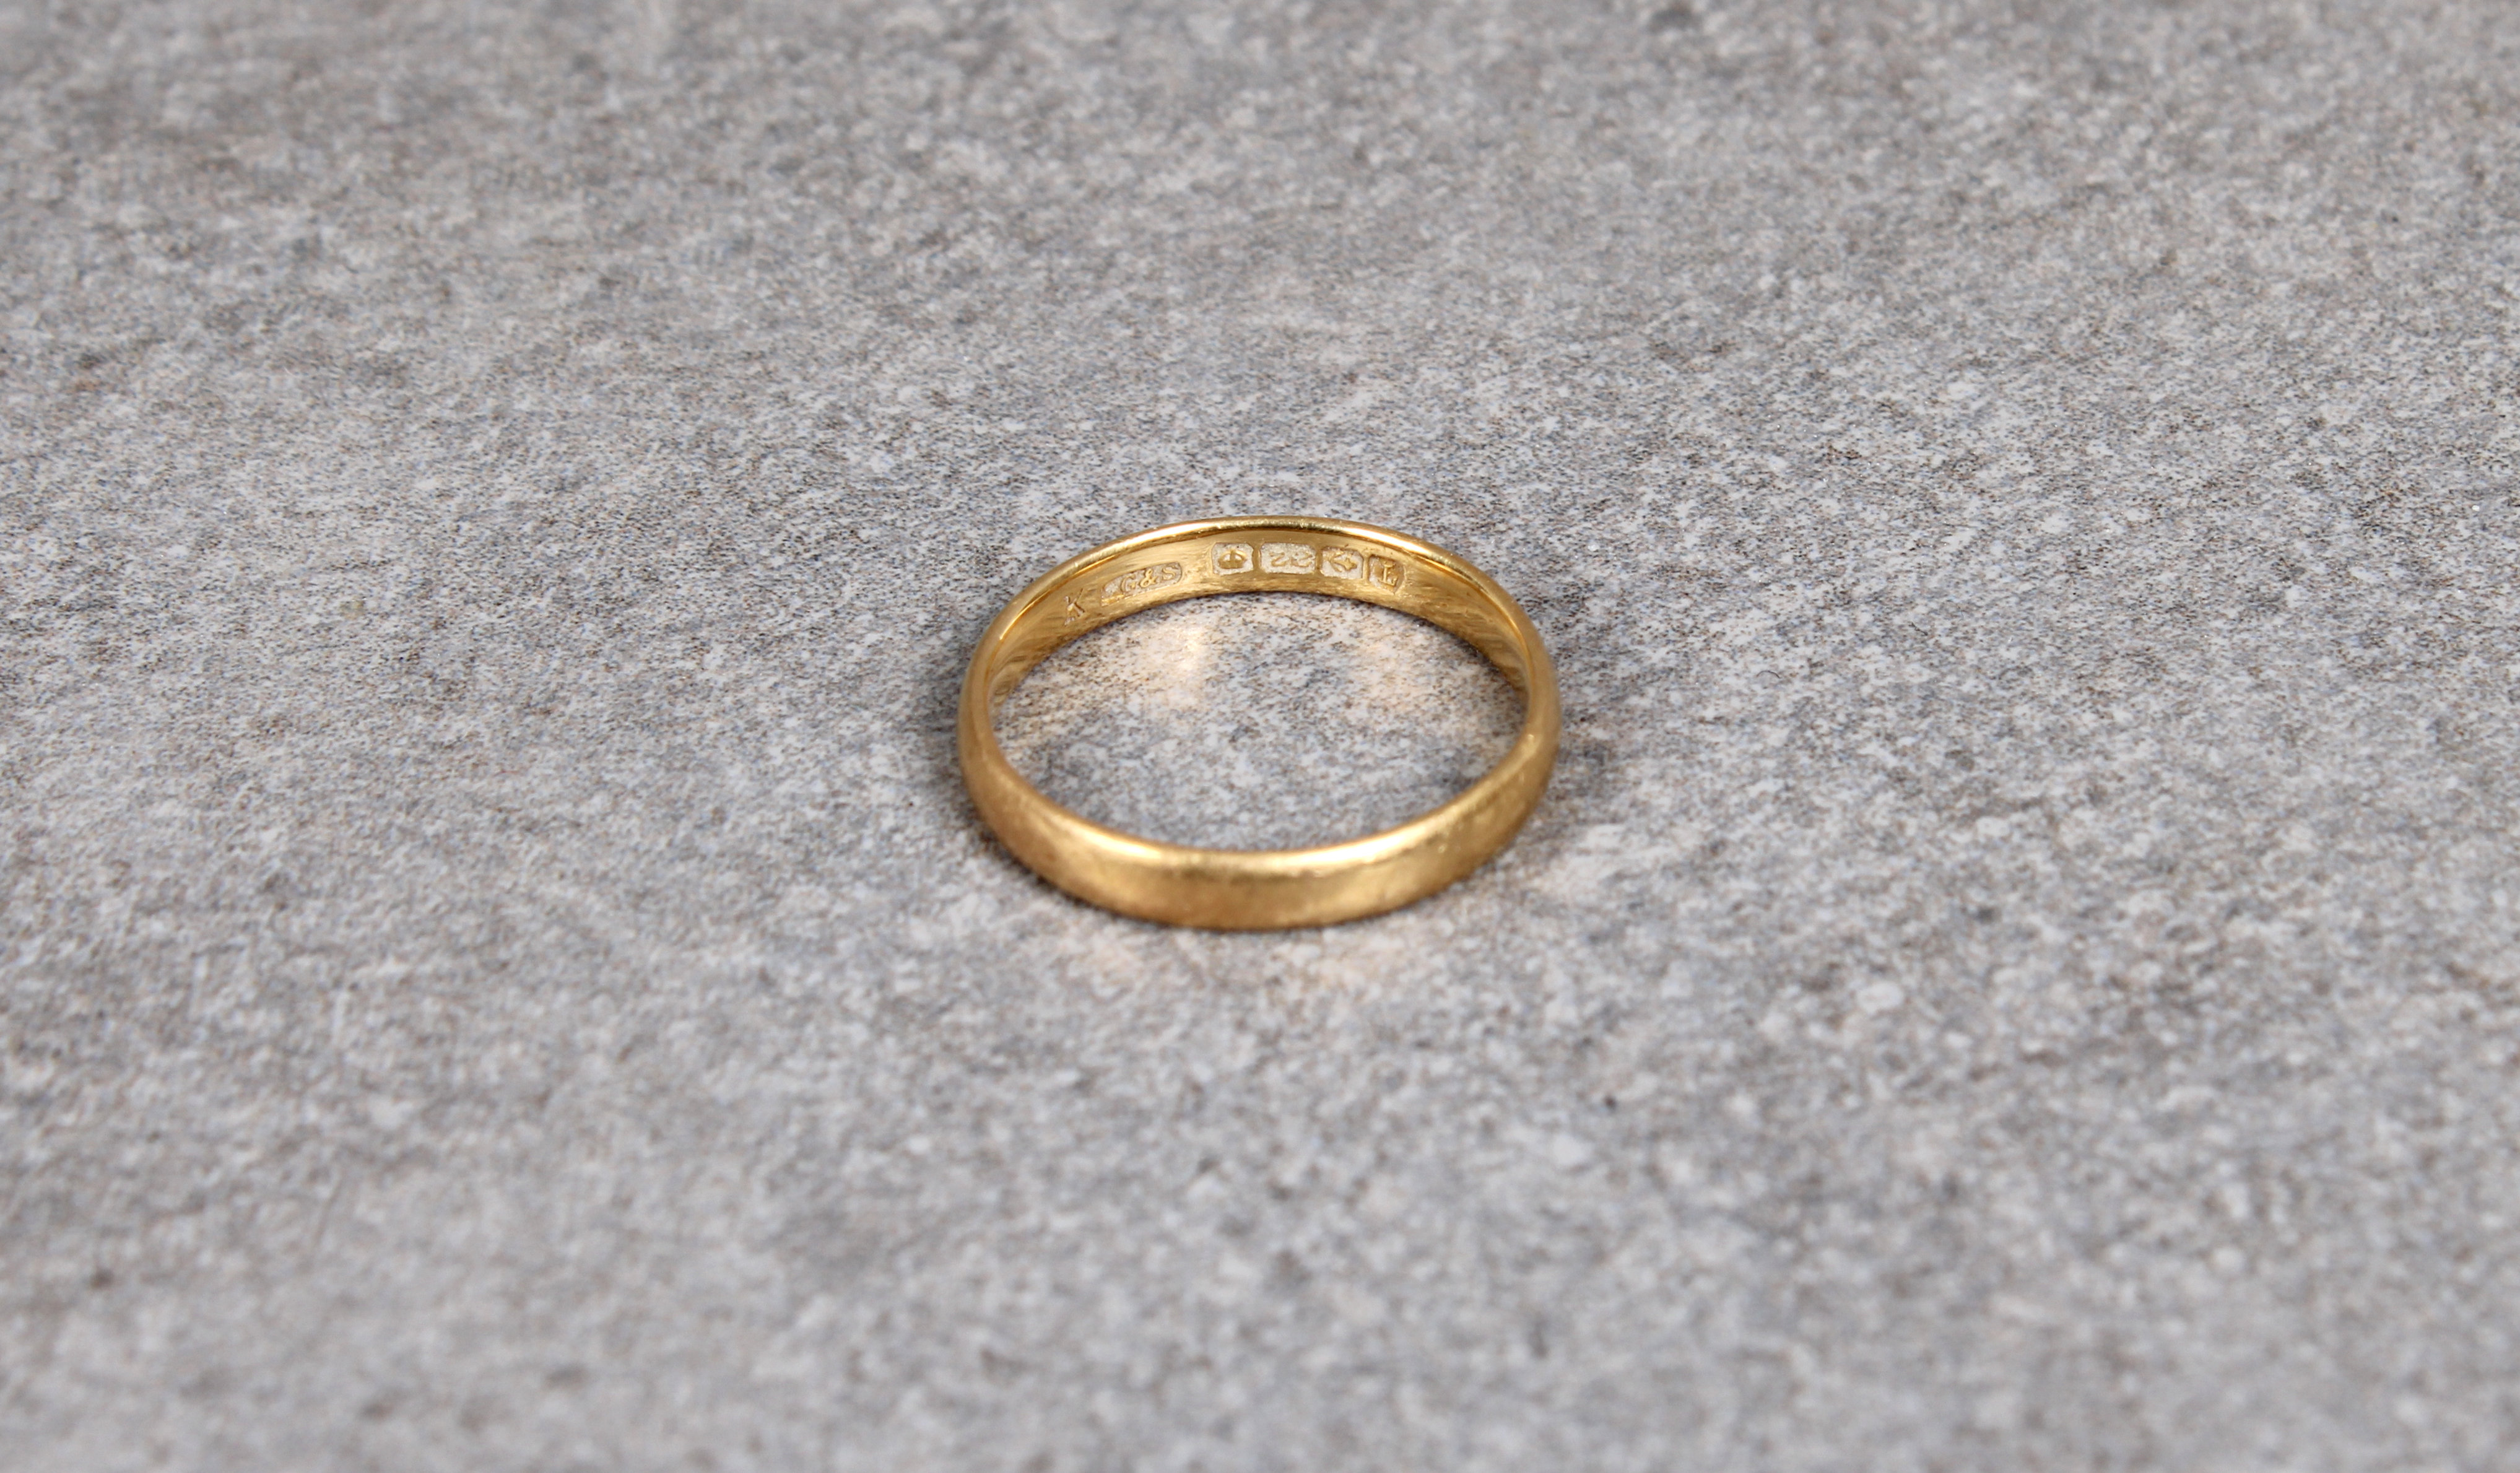 A 22ct yellow gold wedding band